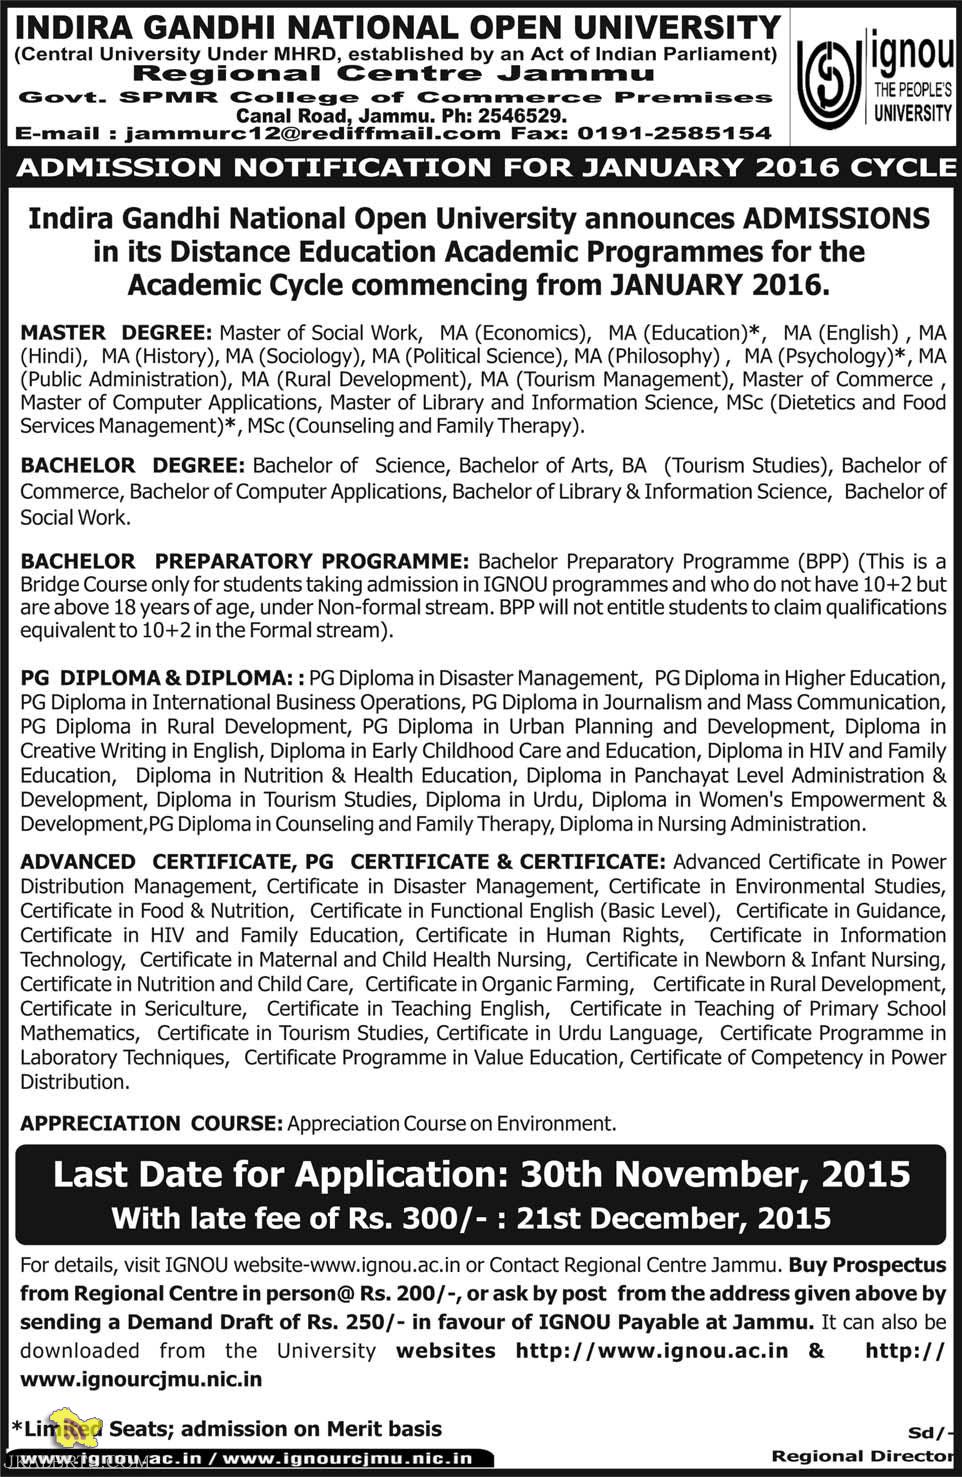 IGNOU ADMISSION OPEN FOR JANUARY 2016